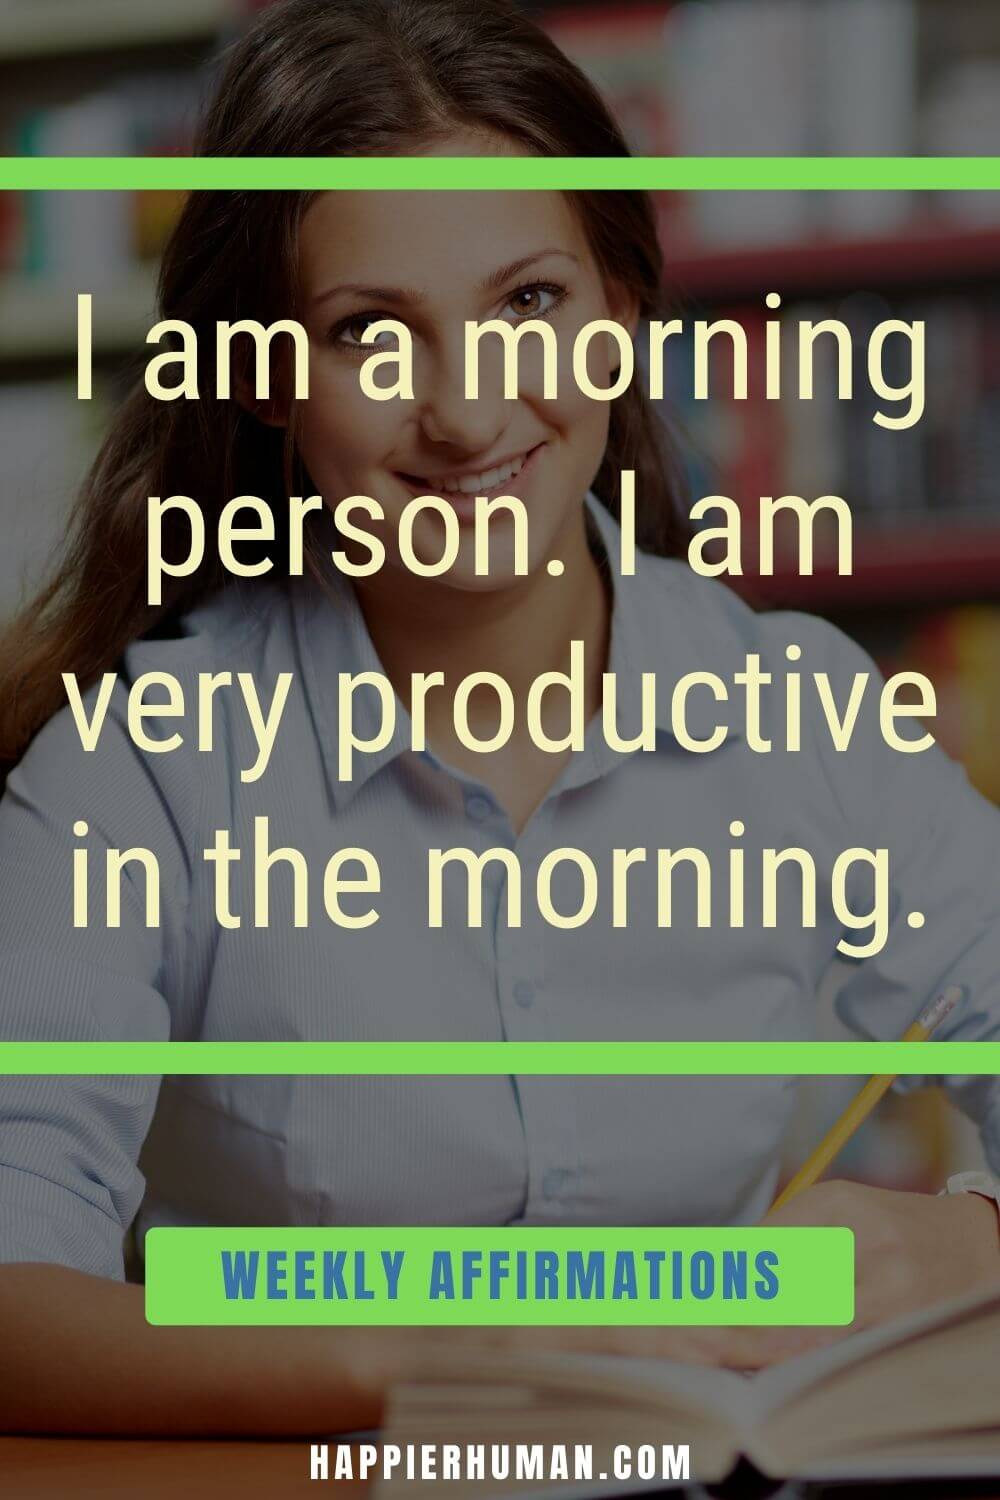 Weekly Affirmations - I am a morning person. I am very productive in the morning. | positive affirmations to say everyday | positive affirmations examples | short positive affirmations